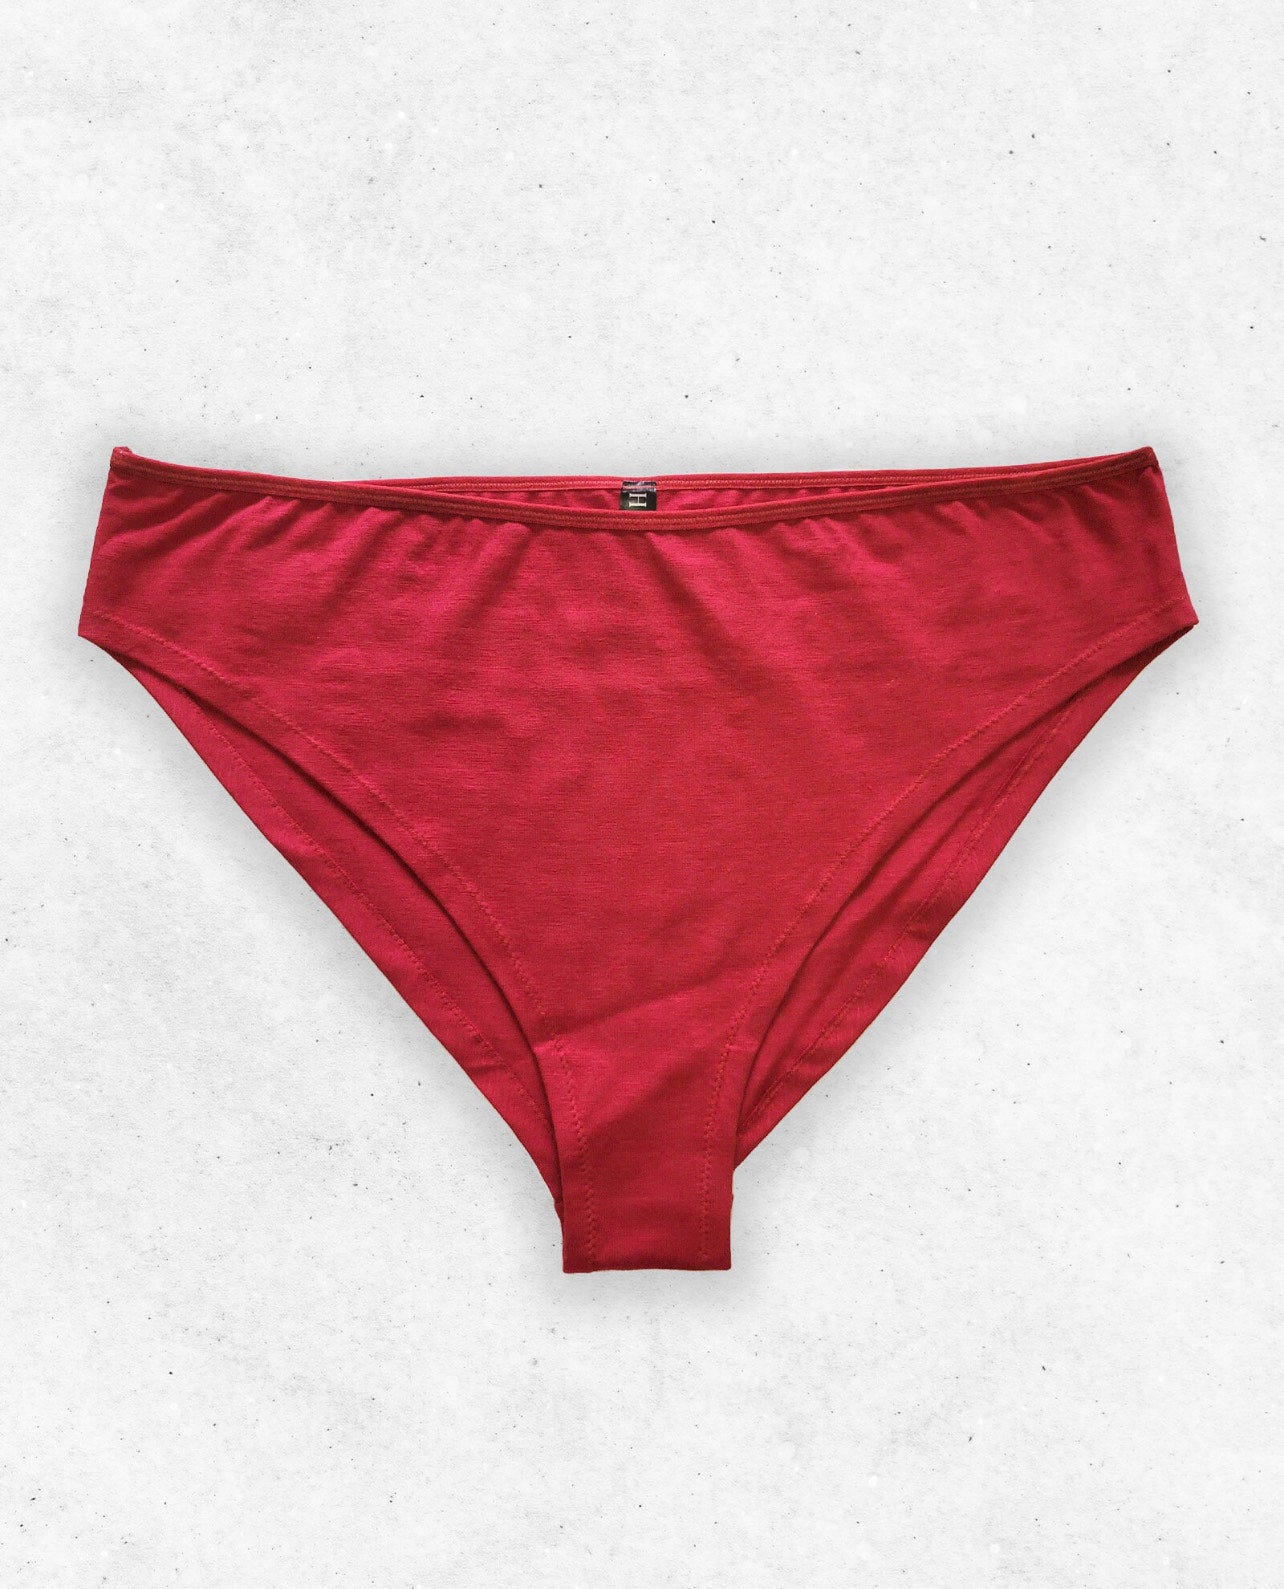 Plus Size Underwear Cheeky Hipster. Red Hipster plus size BIG GIRL